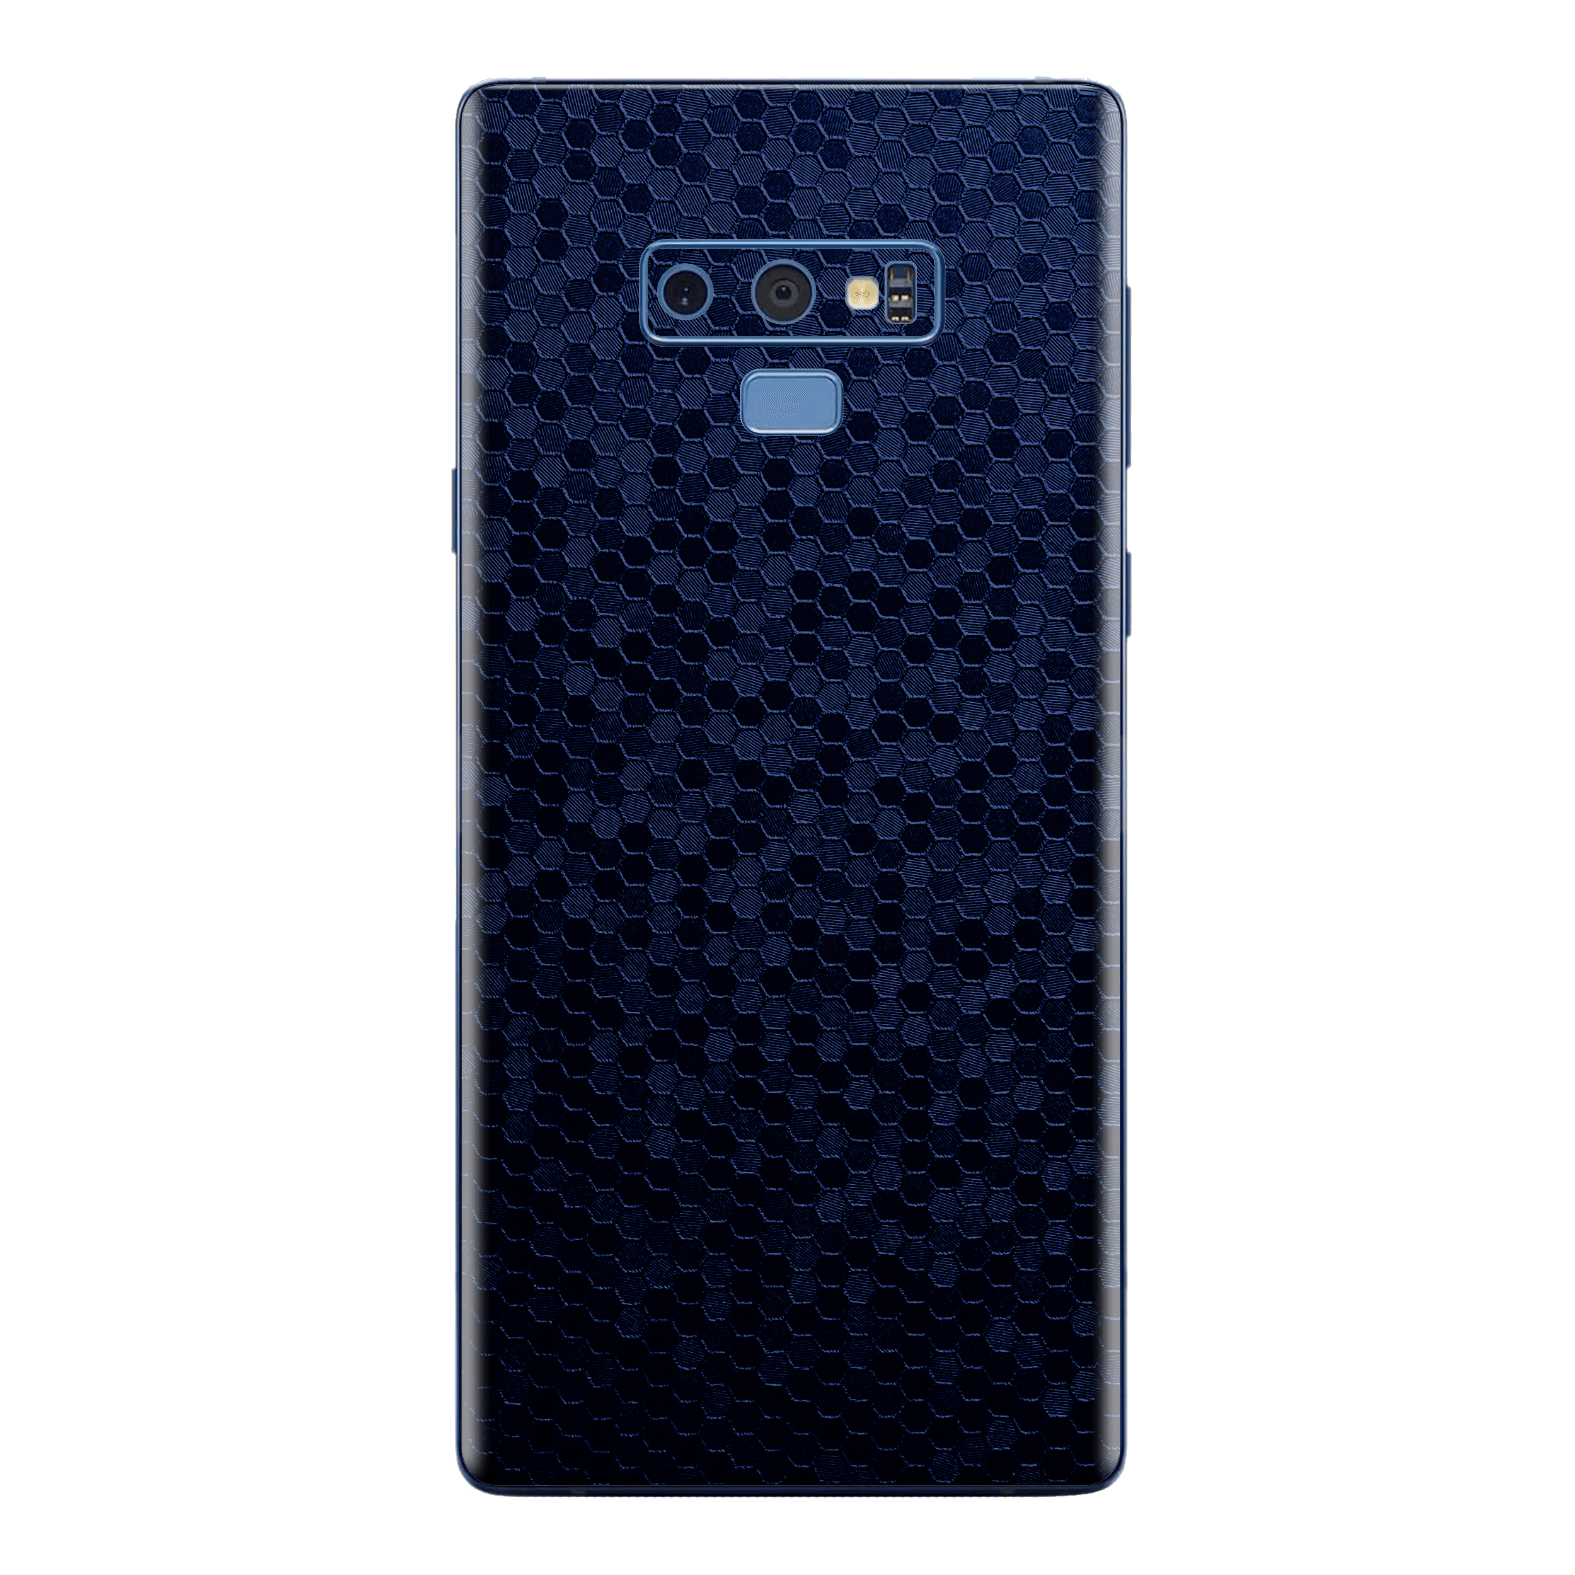 Samsung Galaxy NOTE 9 Luxuria Navy Blue Honeycomb 3D Textured Skin Wrap Sticker Decal Cover Protector by EasySkinz | EasySkinz.com